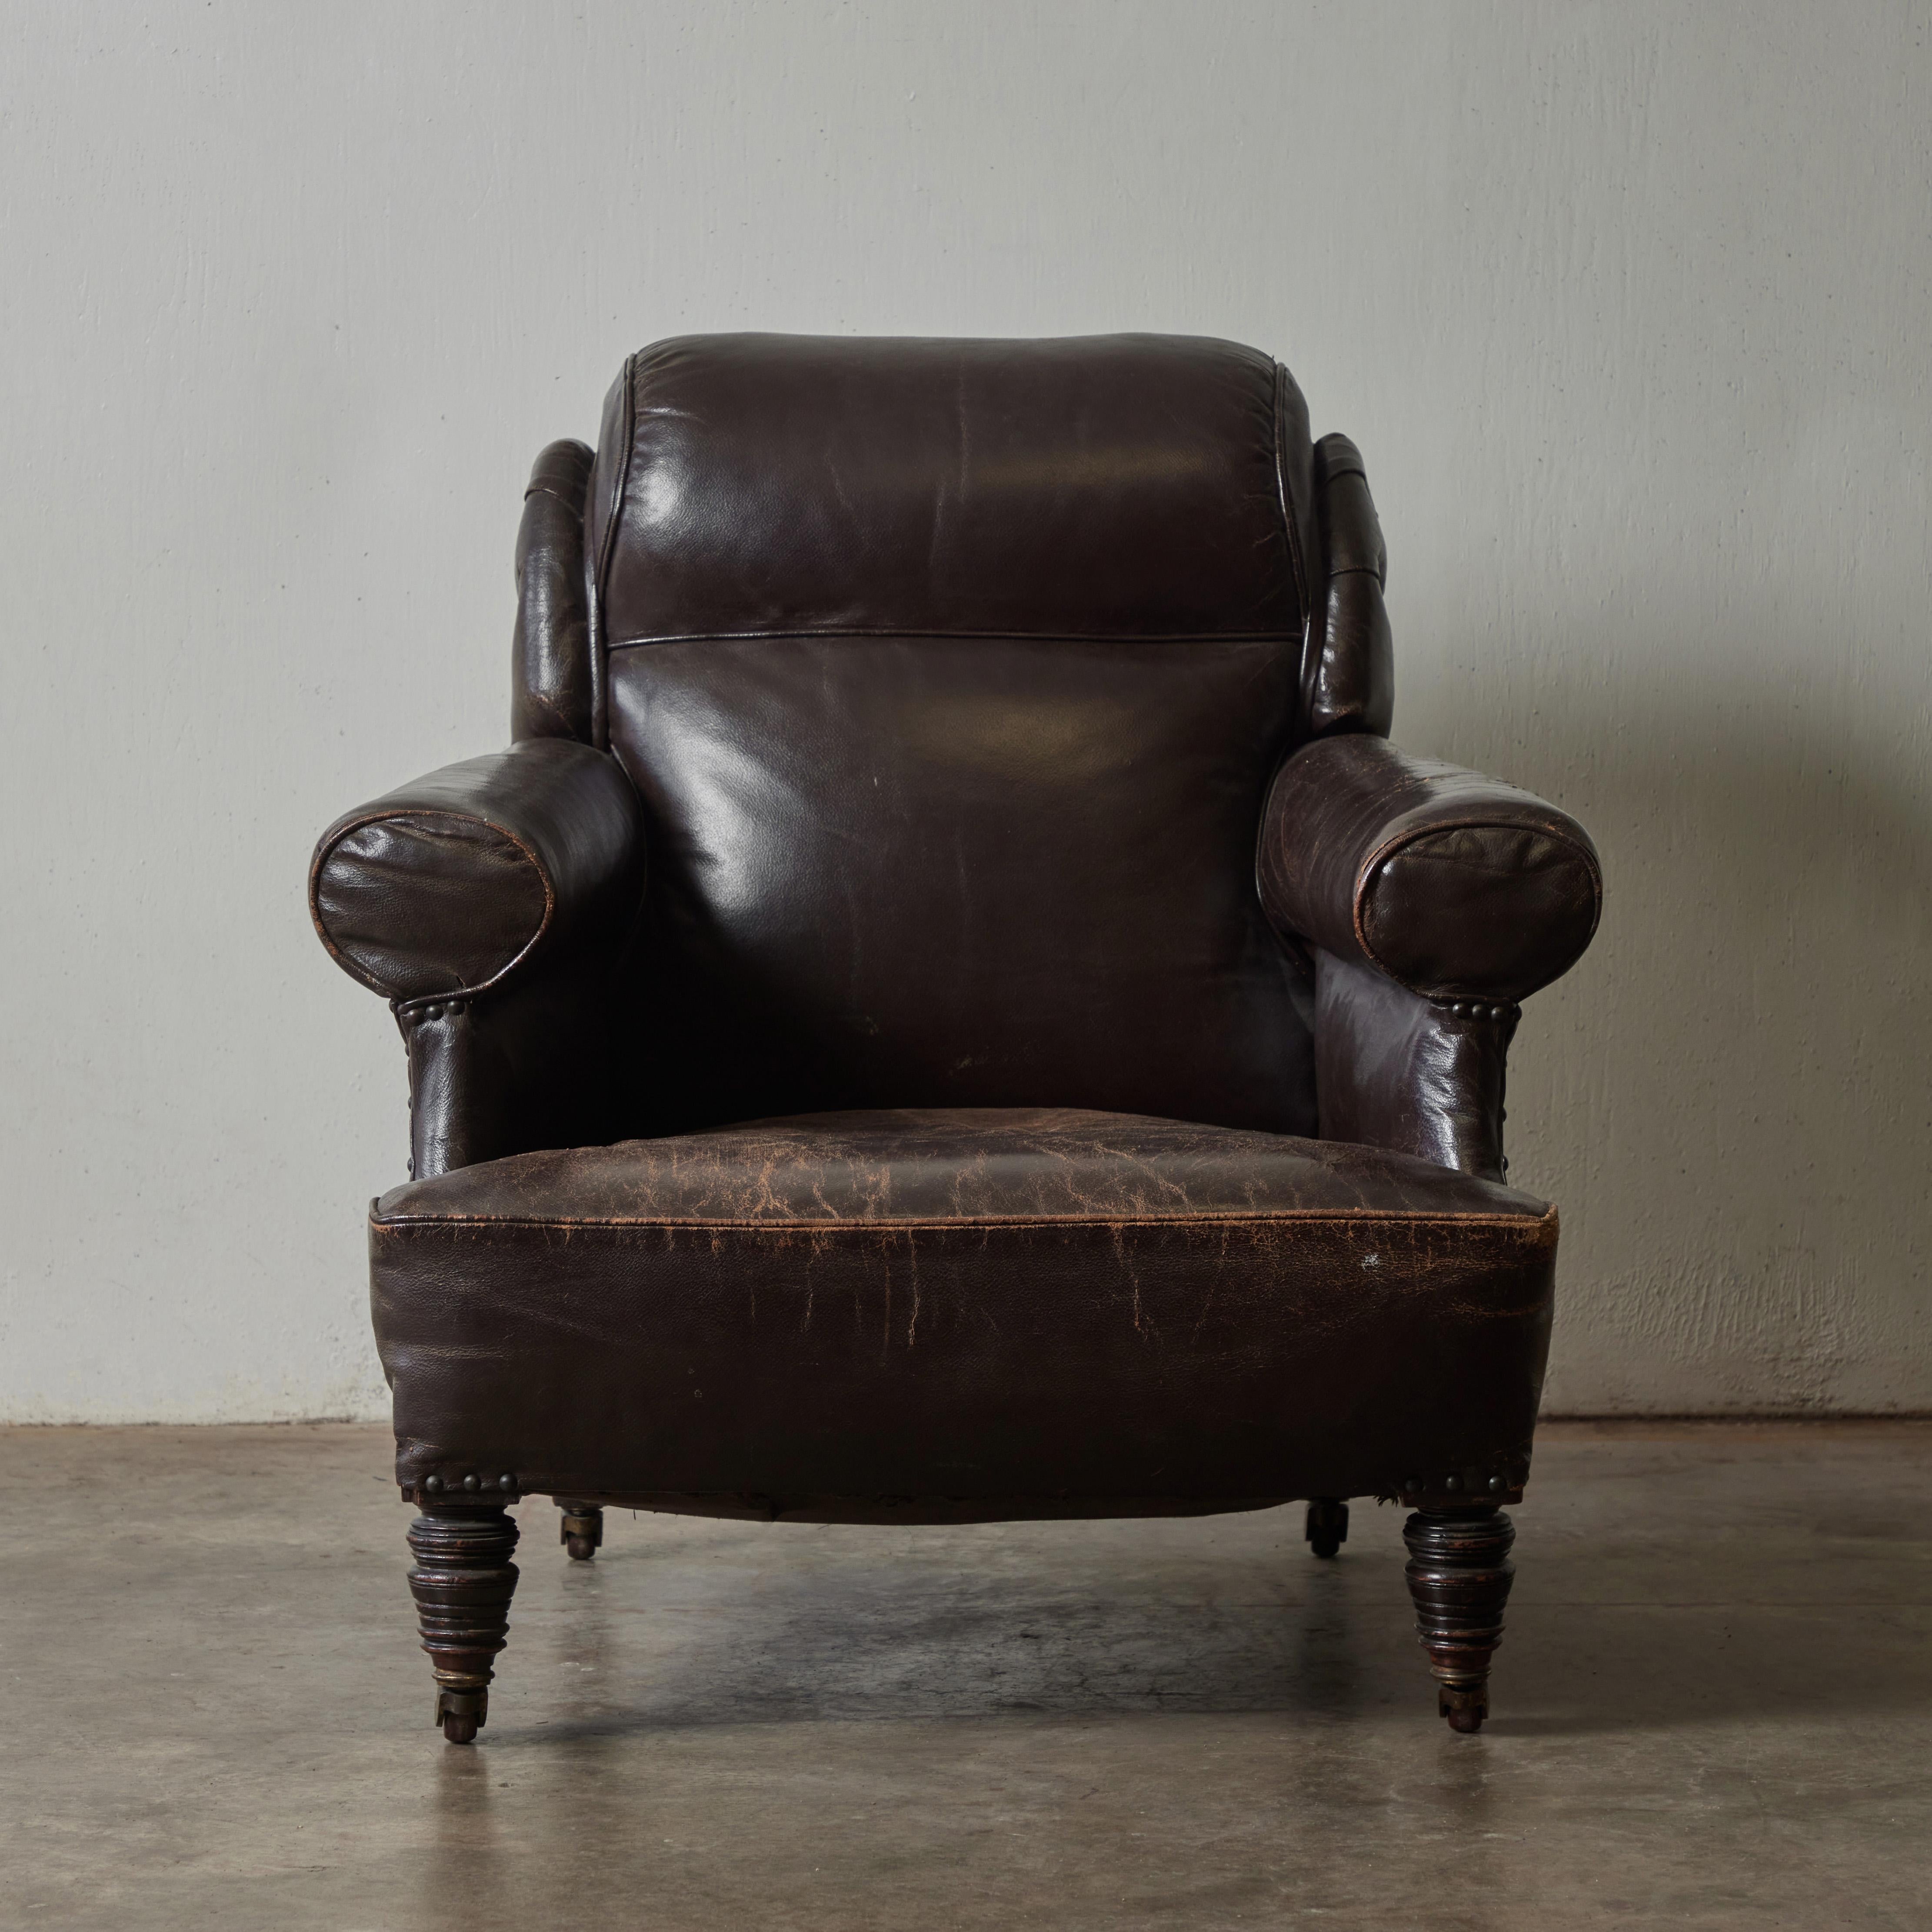 Early 19th-century English leather club chair with carved wooden feet set on casters. The rich chocolate upholstery has a wonderfully soft patina, making this classic piece both comfortable and handsome. 

England, circa 1840

Dimensions: 33W x